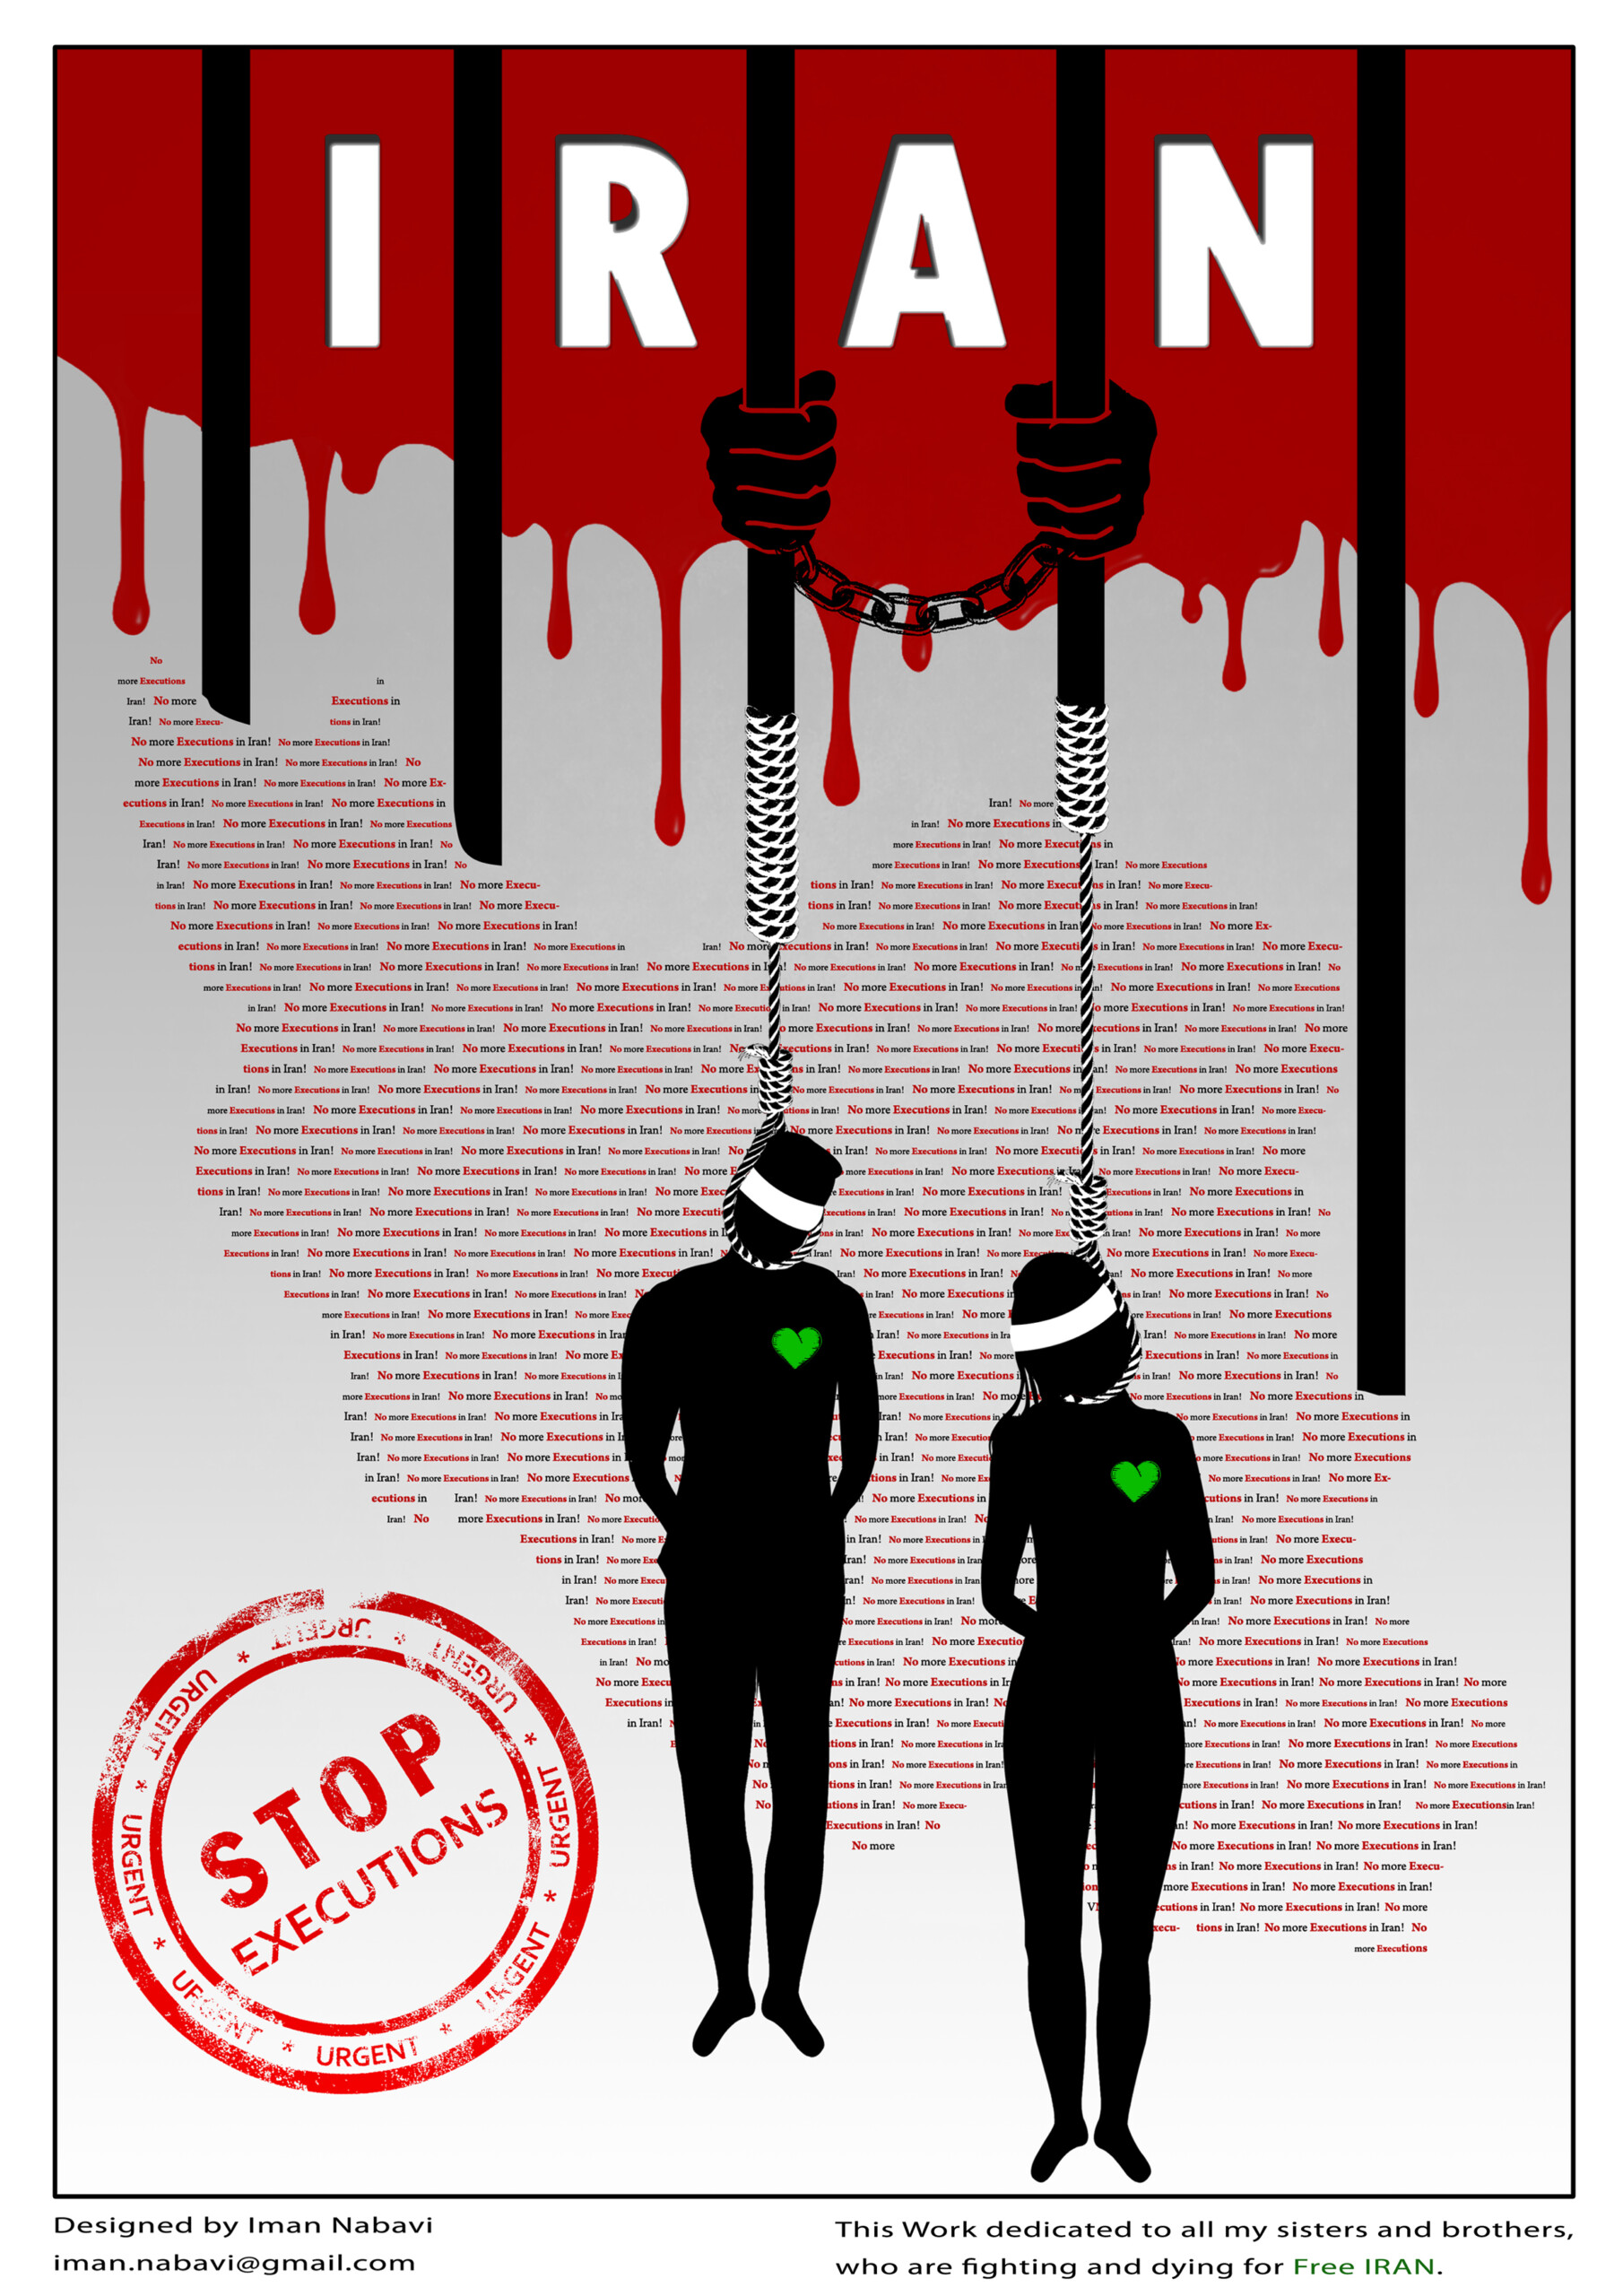 STOP EXECUTIONS poster with the IRAN written in white letters over dripping blood and the outlines of two hanging bodies over the words "No More Executions in Iran!" repeated multiple times